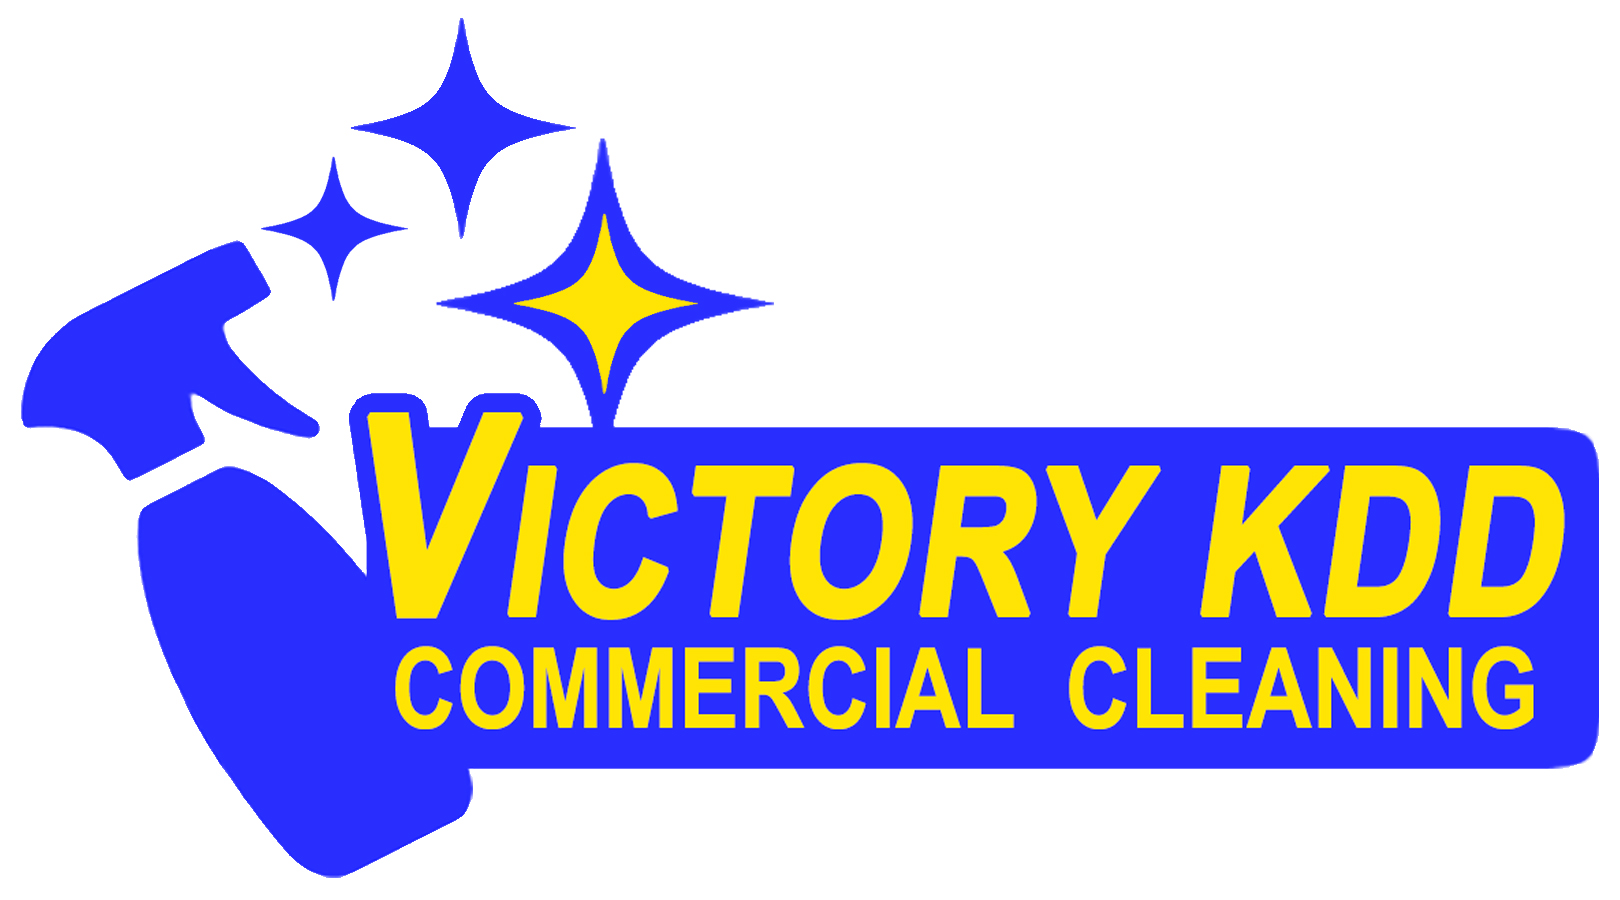 Victory KDD Commercial Cleaning Logo